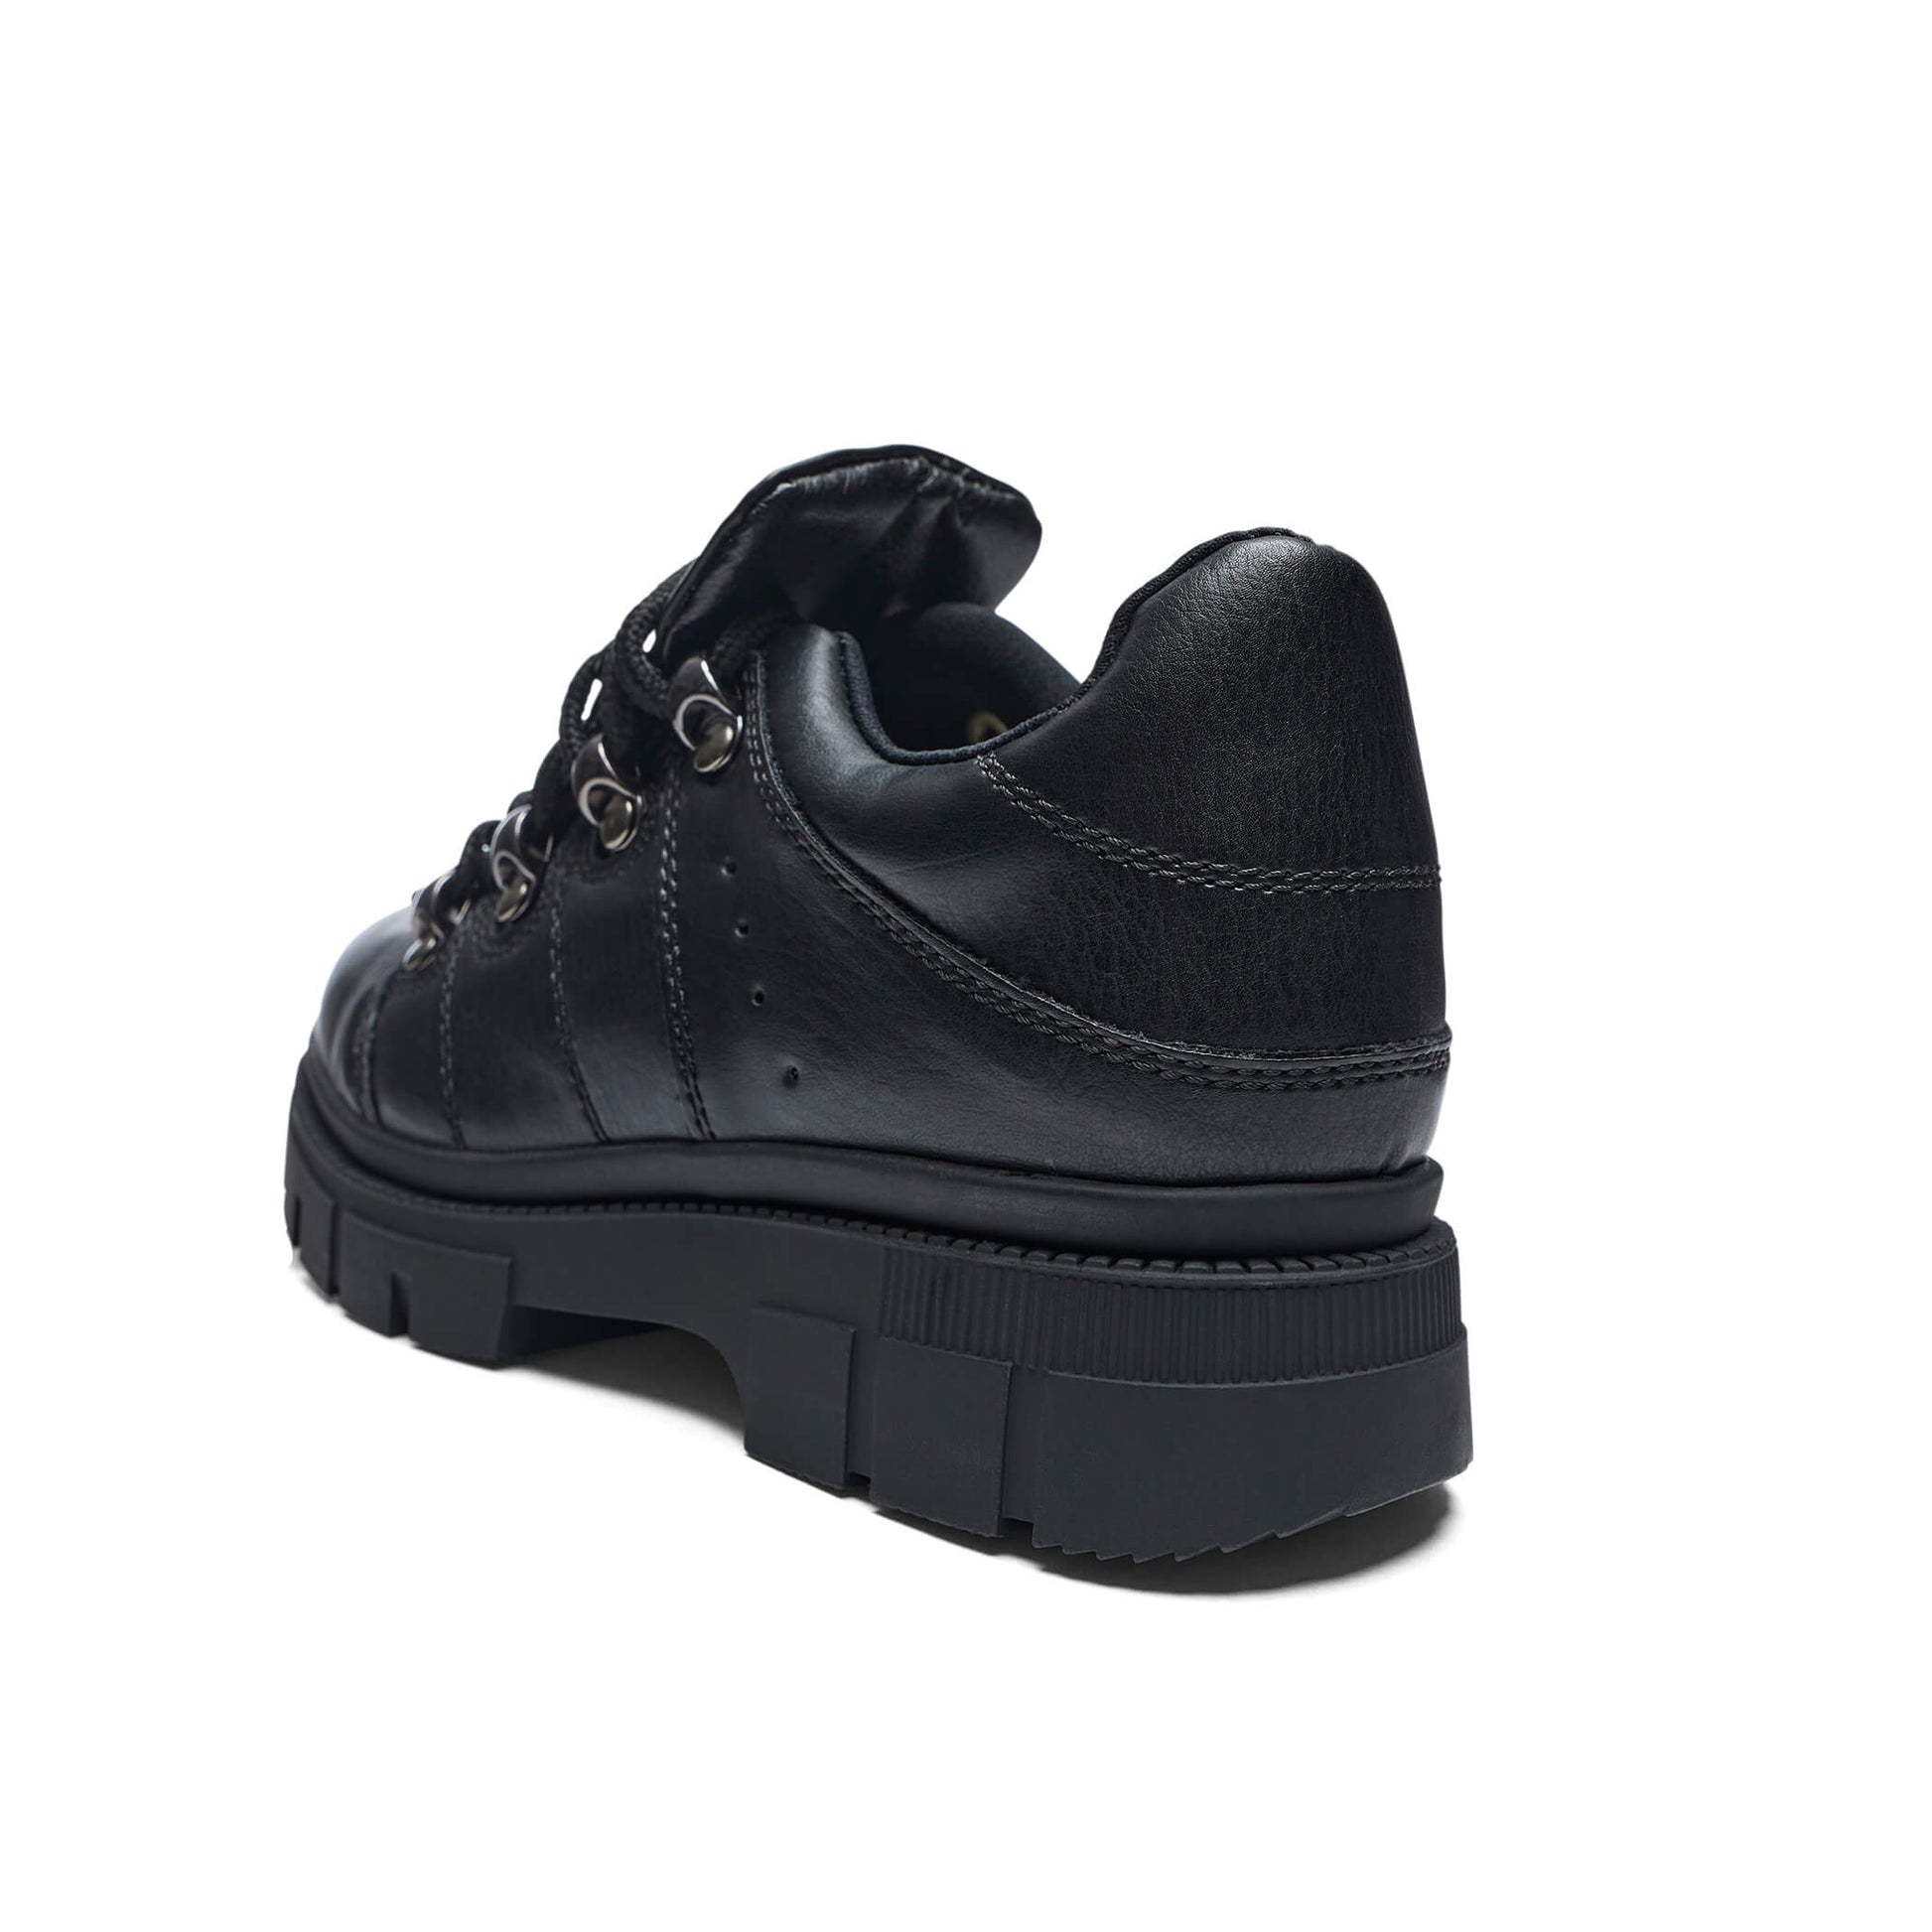 Lil’ Rimo Core Black Trainers - Trainers - KOI Footwear - Black - Back Detail View